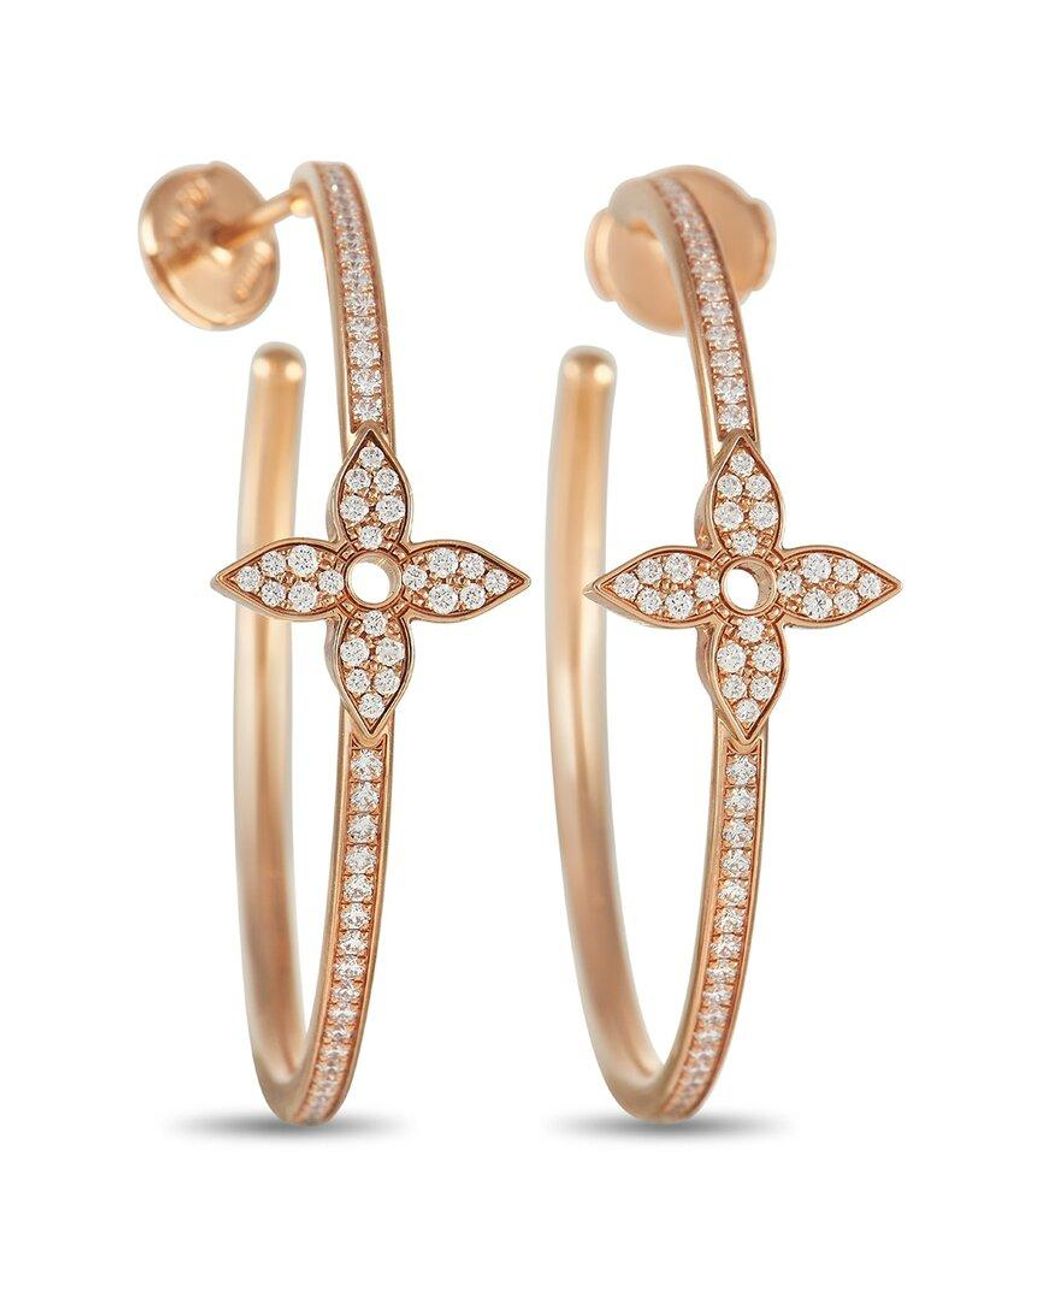 Louis Vuitton Louis Vuitton Idylle Blossom 18k Rose Gold 0.61 Ct. Tw.  Diamond Hoops in White